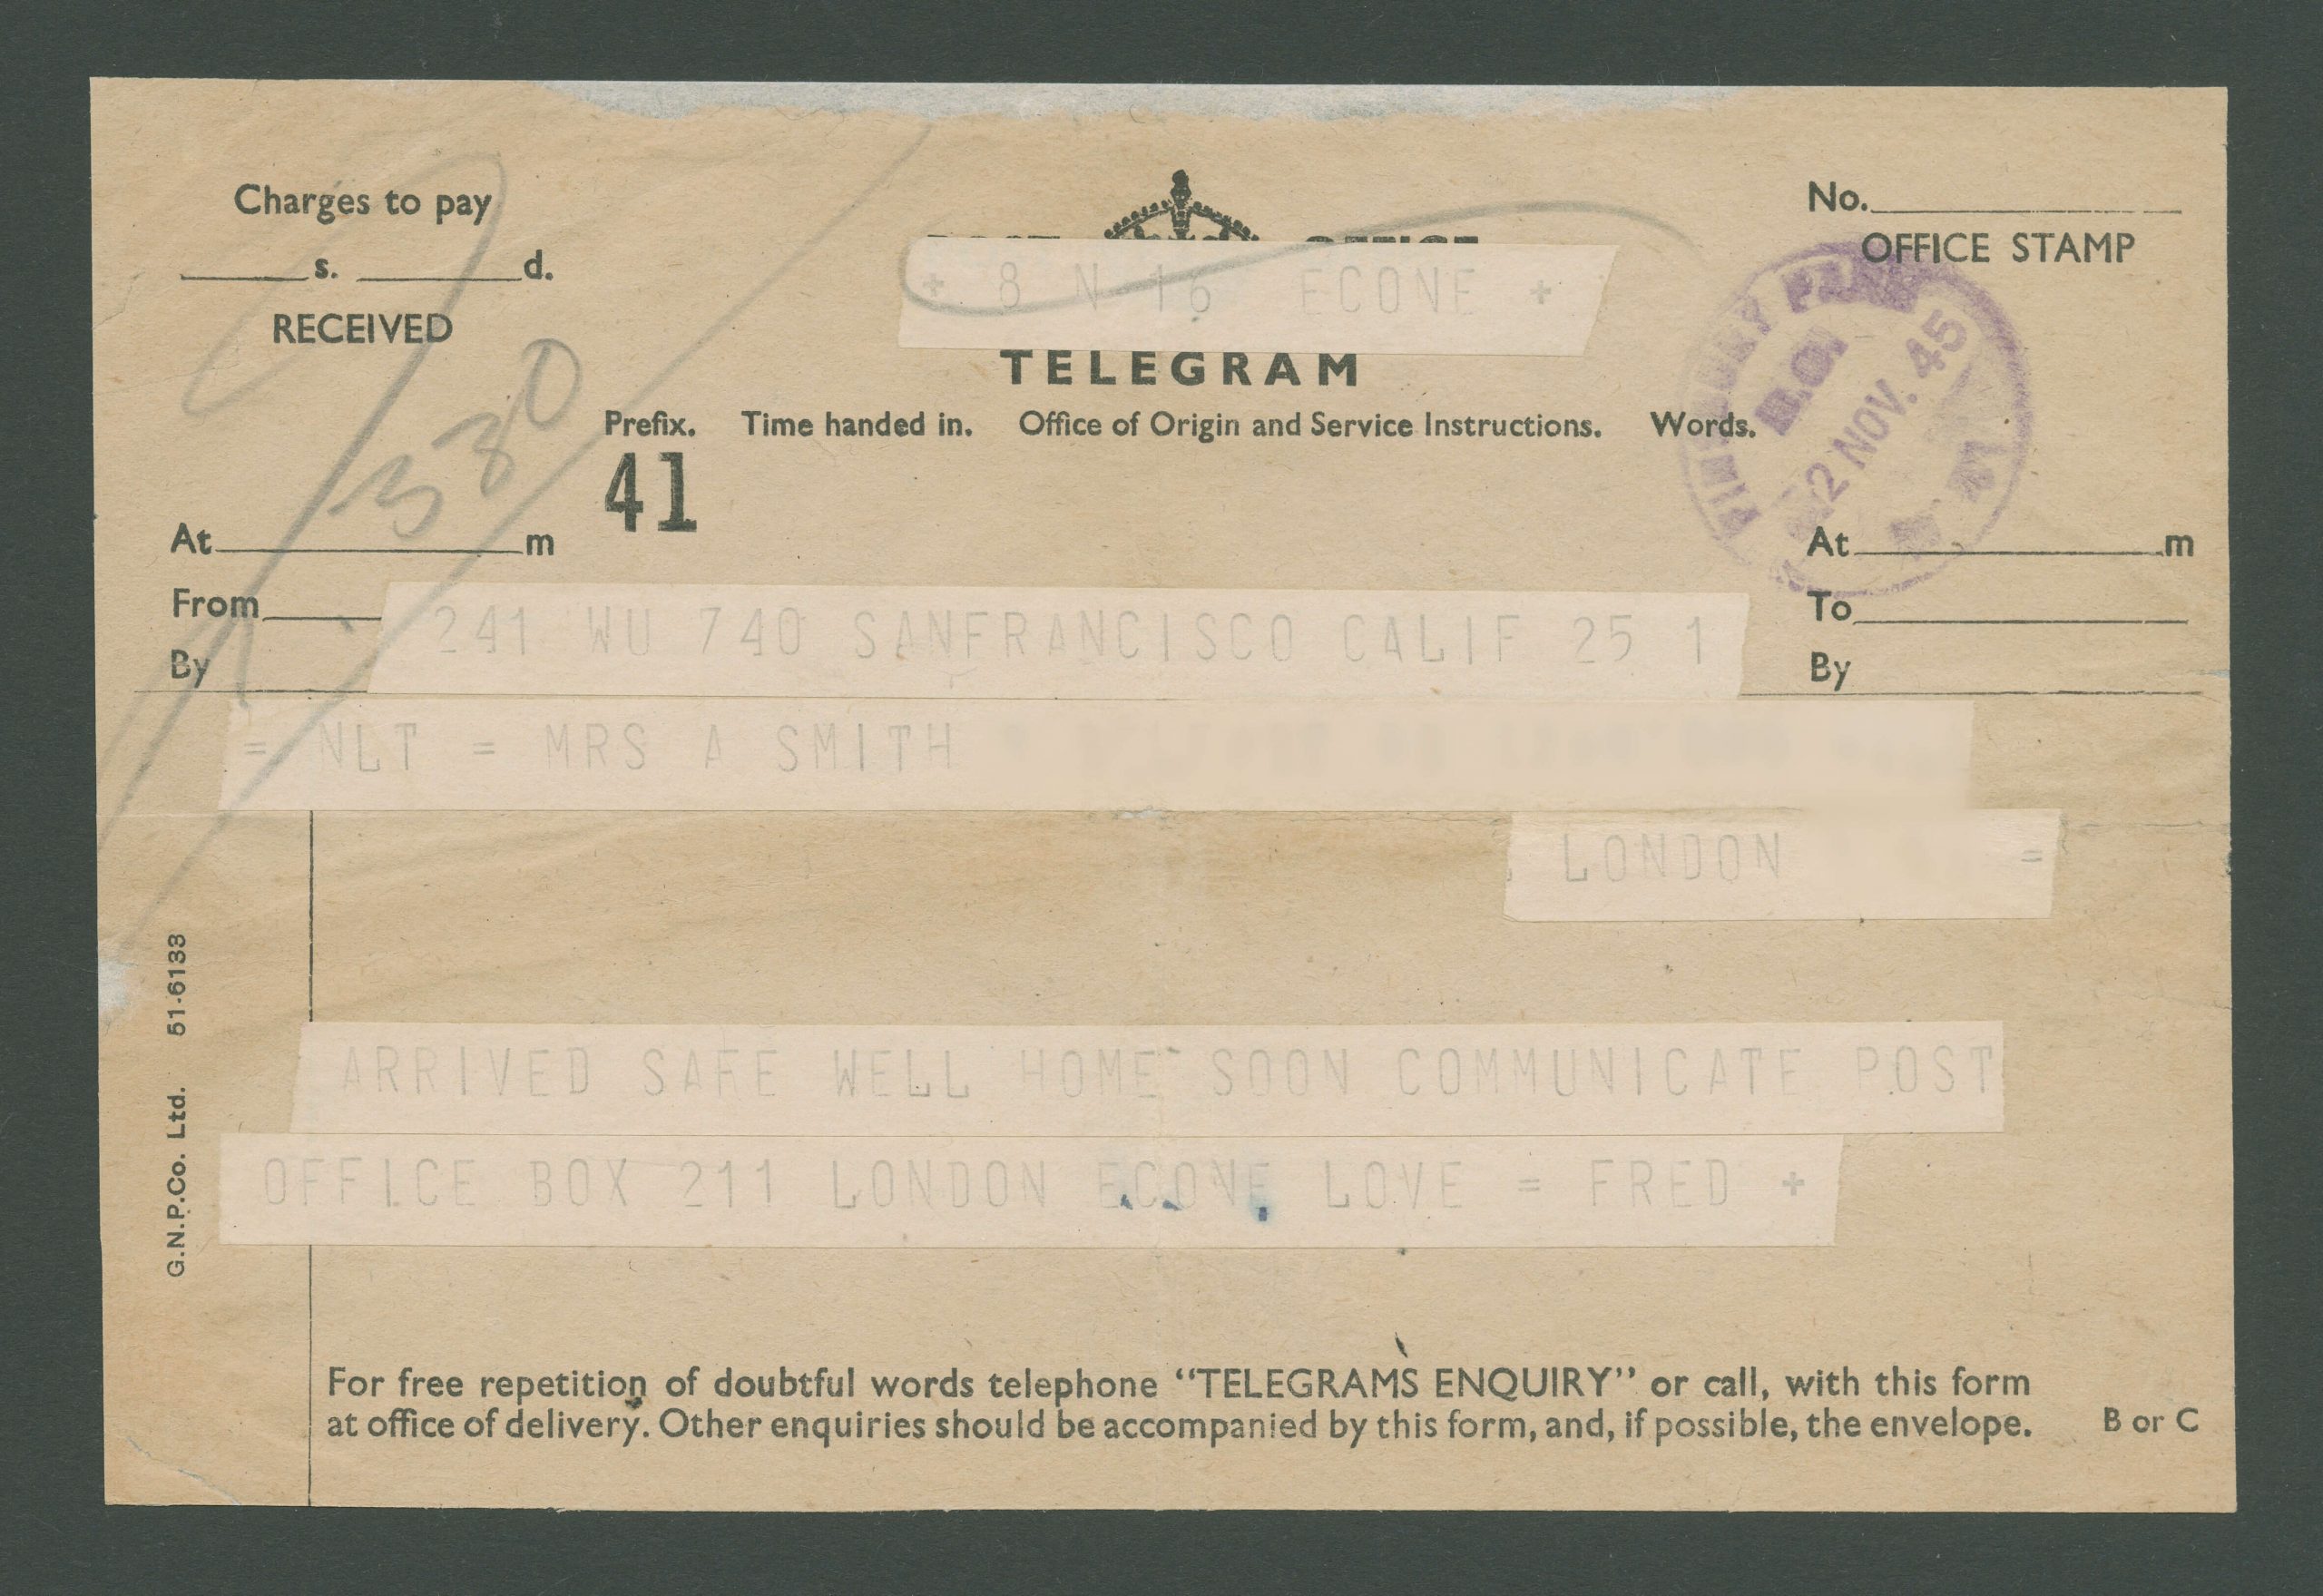 Fred tells his wife that he will be home soon, via this Telegram